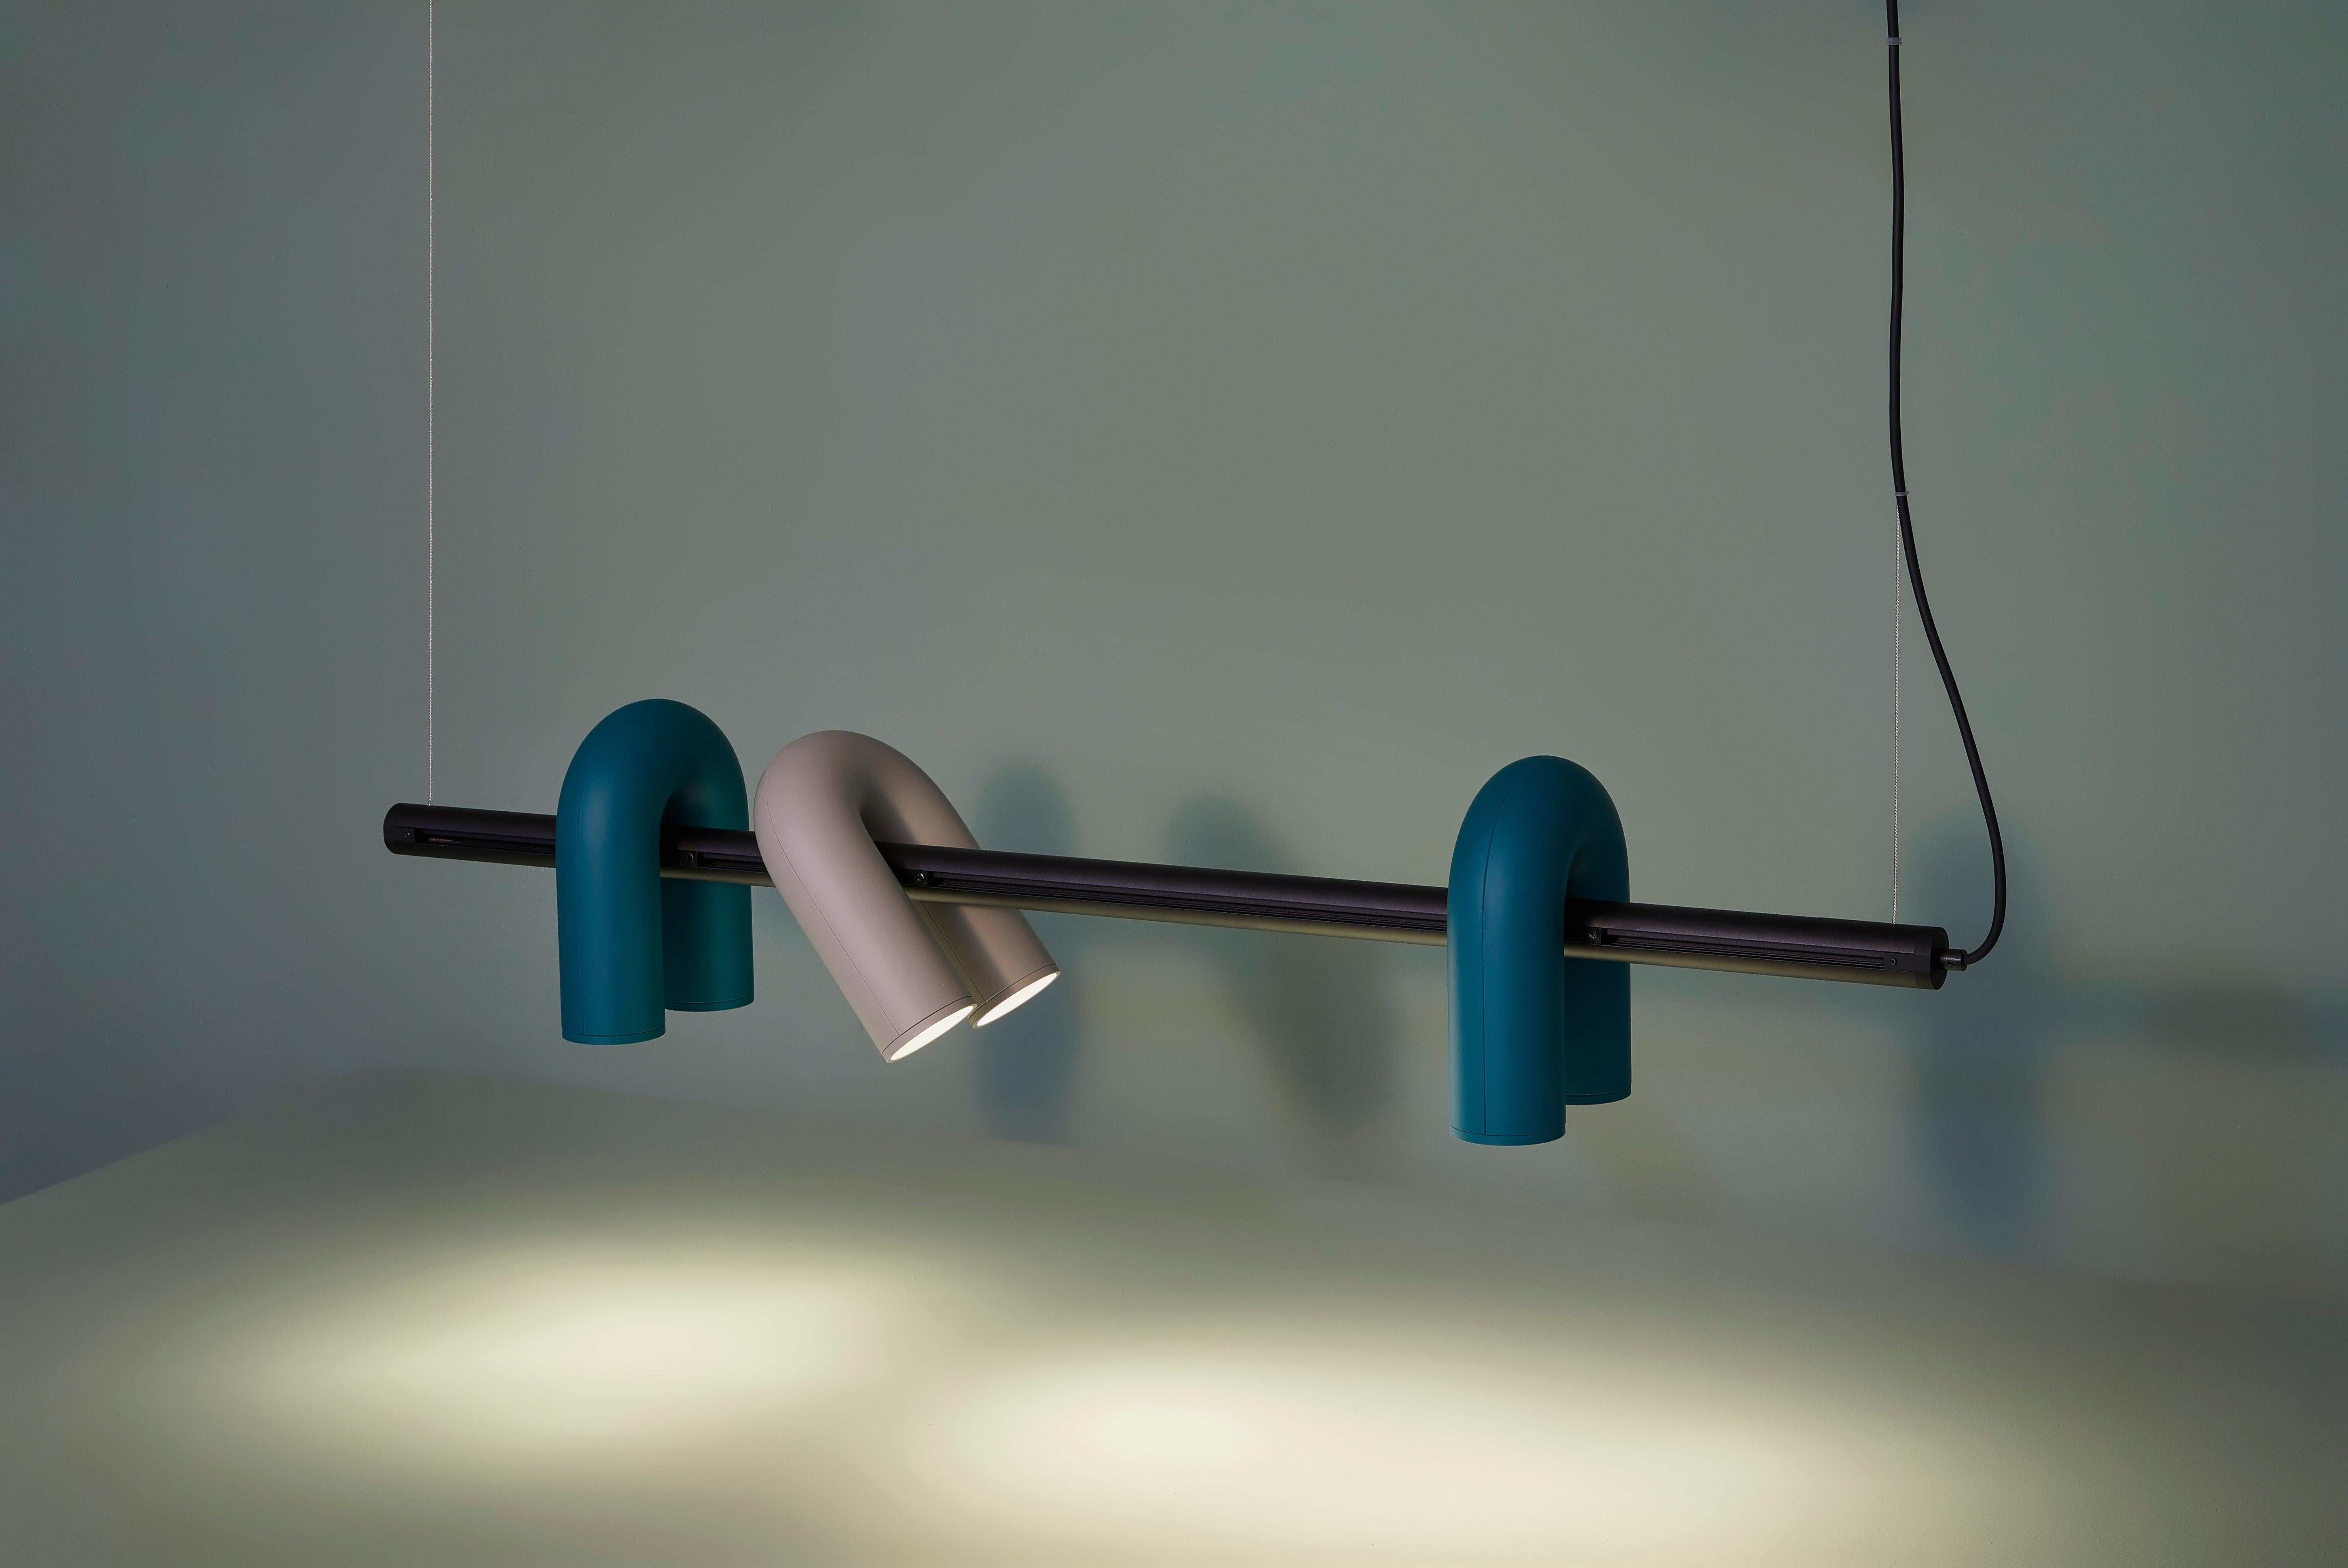 Cirkus track lights by AGO Lighting
Coated ABS, aluminum

UL Listed
LED GU10 110-240V (not included)

Four colors available: Charcoal, grey, green, terracotta
Rail lengths (3 sizes available): 60 x 3 cm / 90 x 3 cm / 120 x 3 cm
Spot size: 18 x 15 x